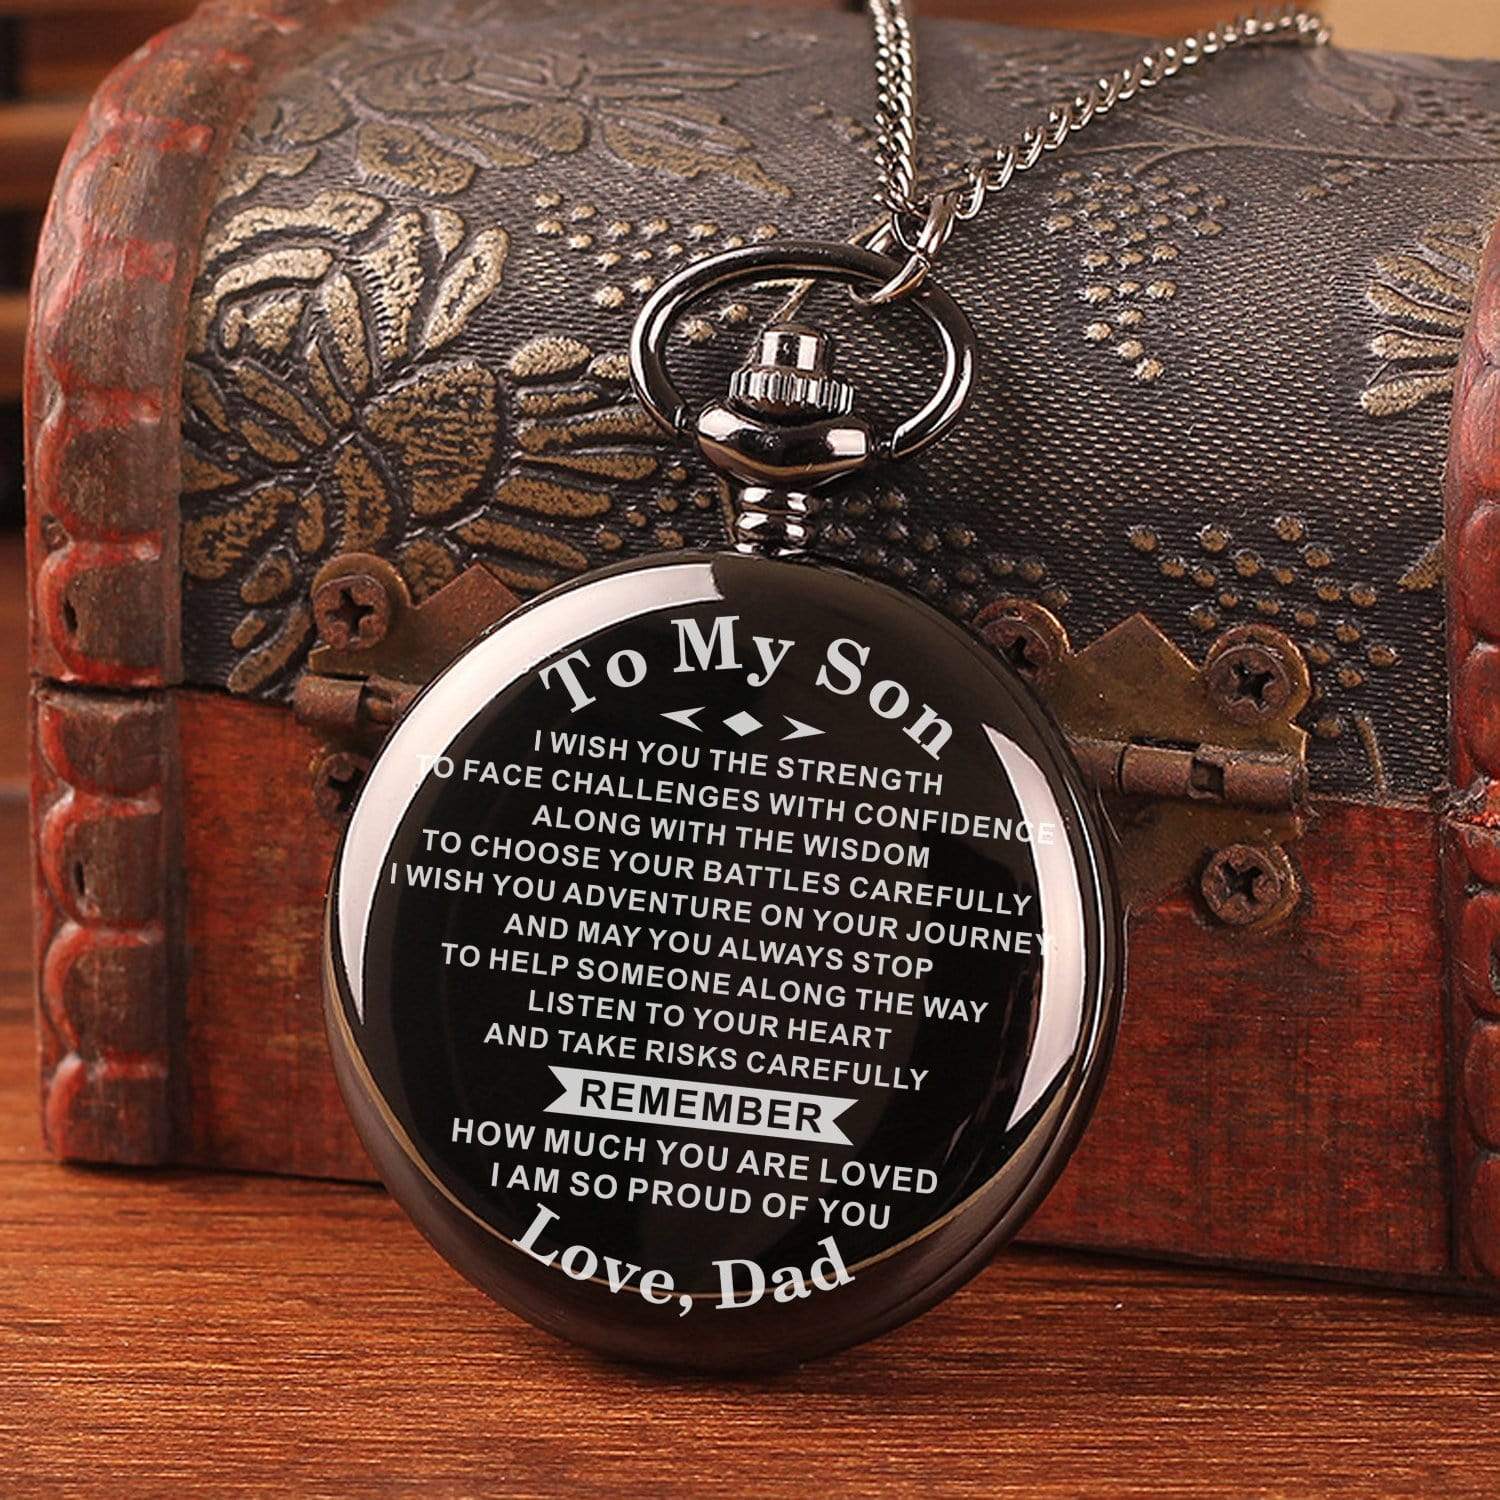 Pocket Watches Dad To Son - Remember How Much You Are Loved Pocket Watch GiveMe-Gifts